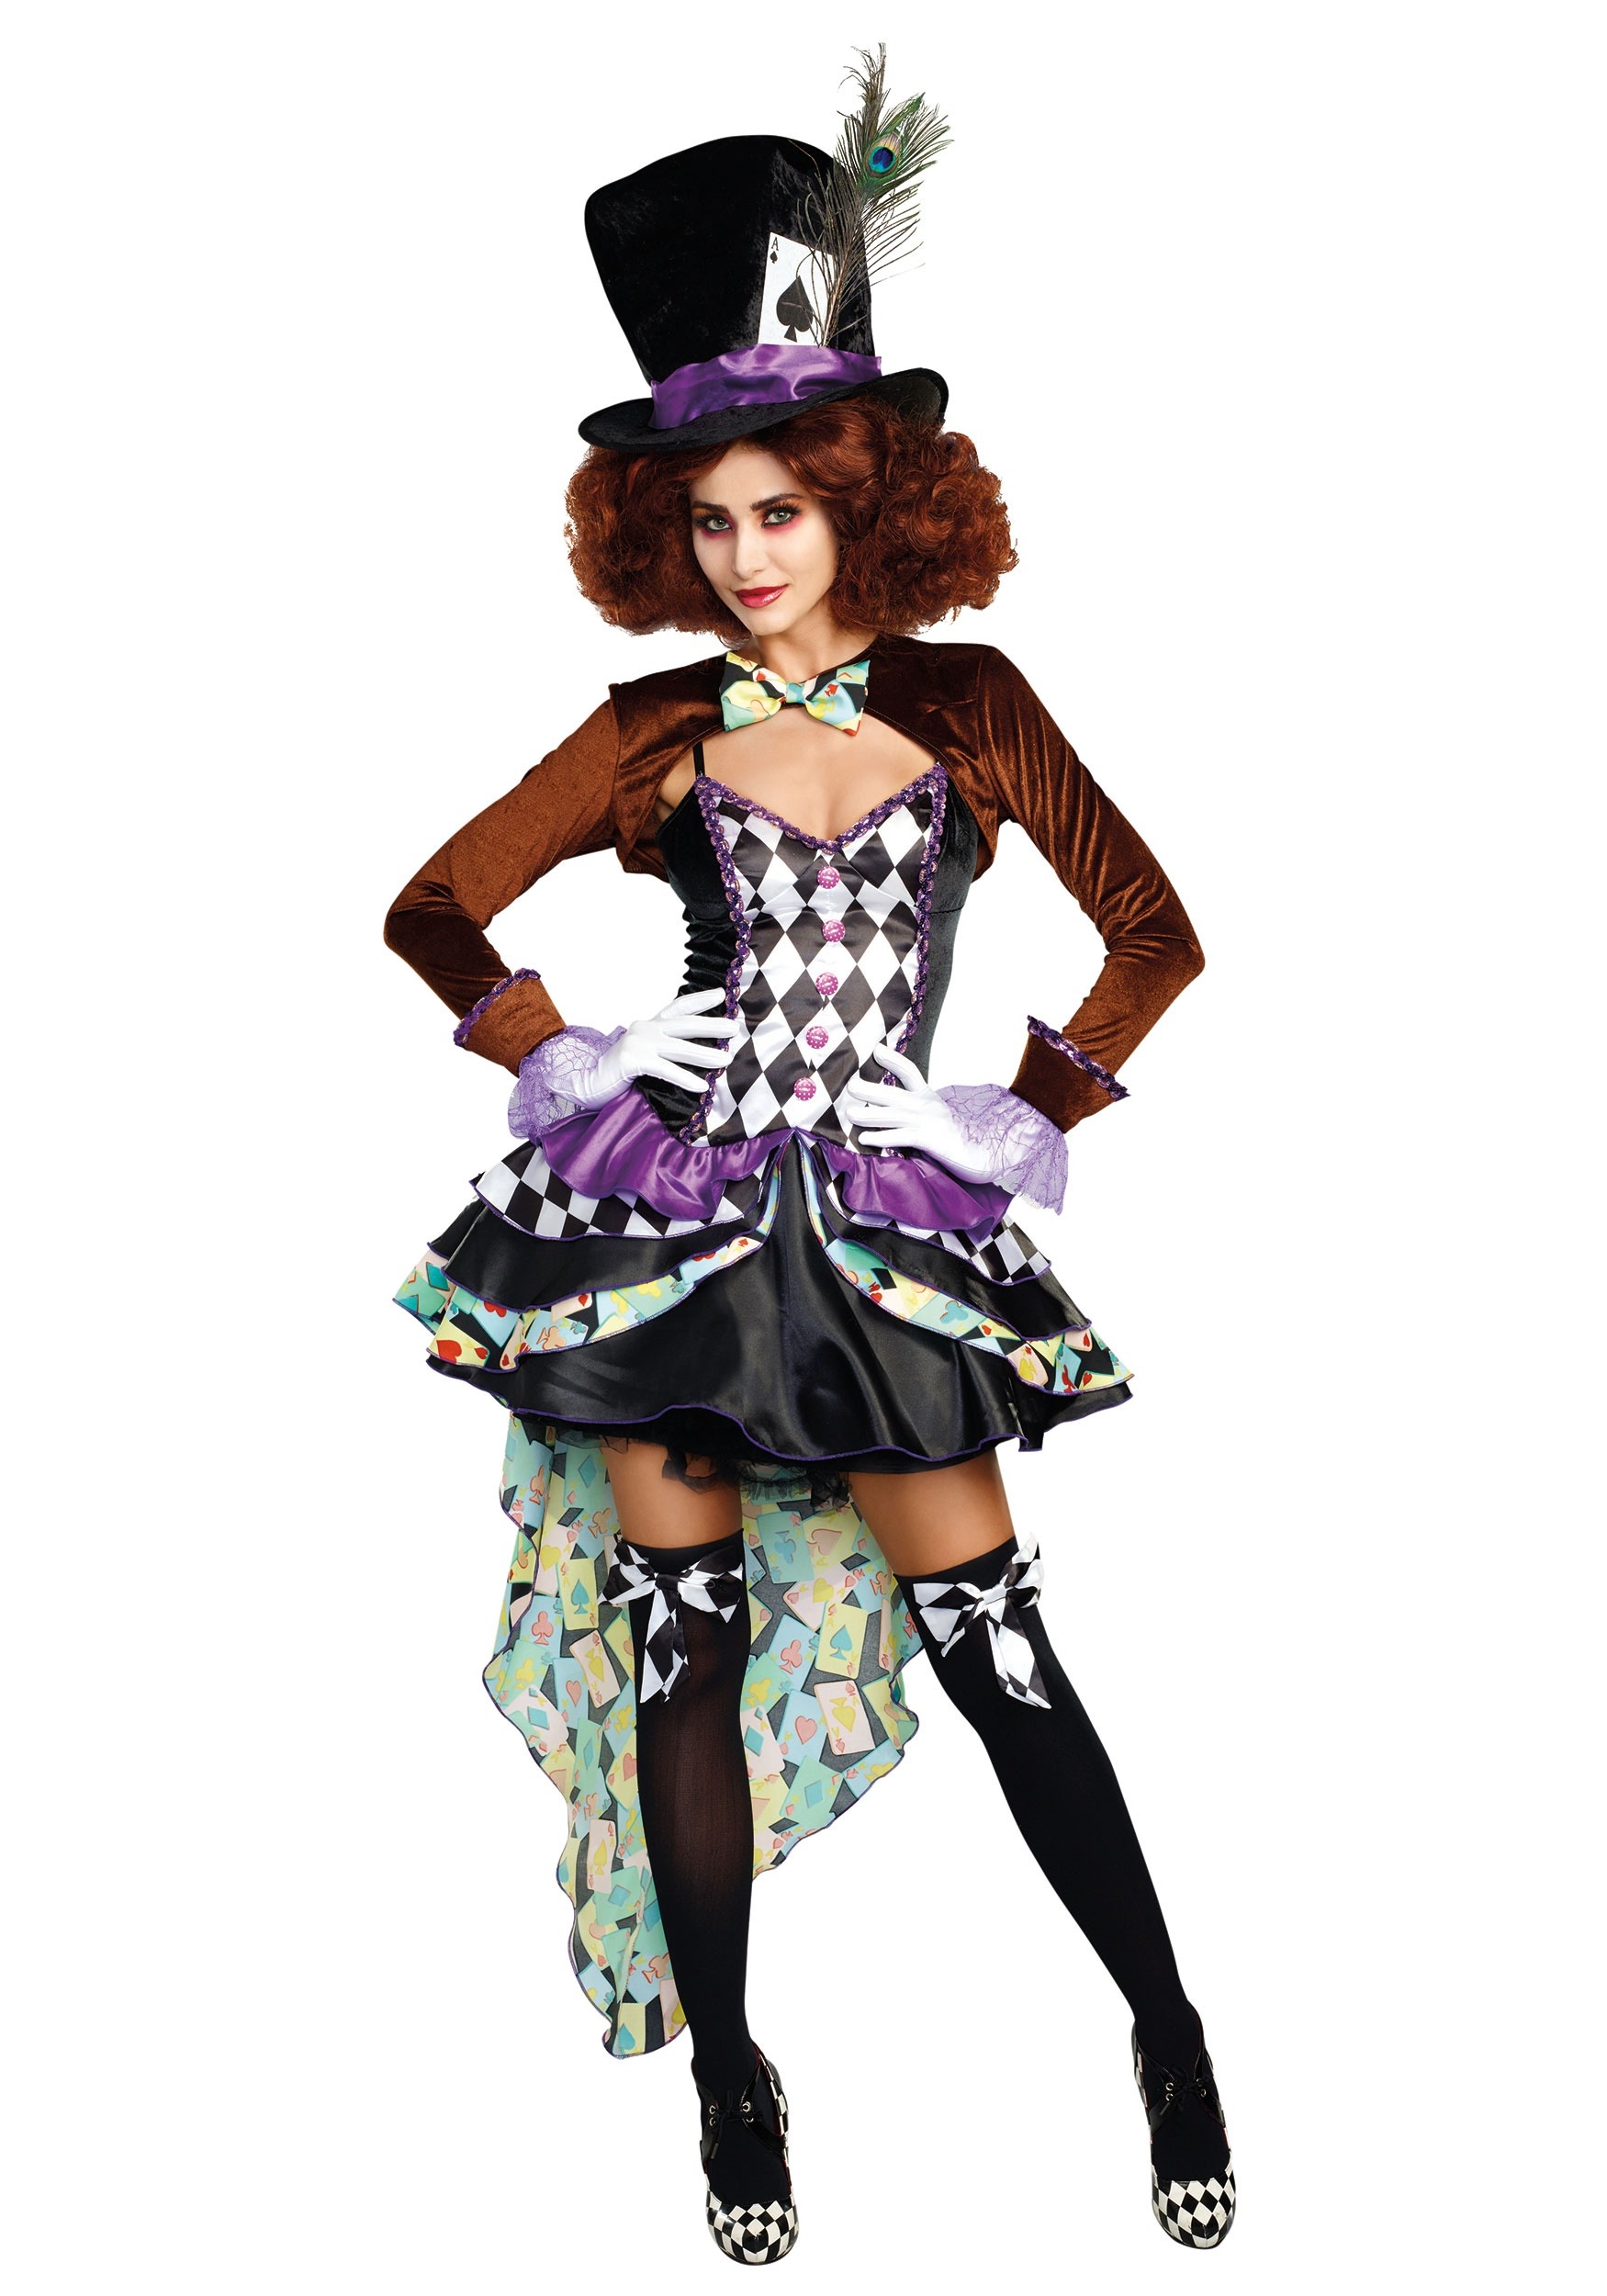 Image of Raving Mad Hatter Costume for Women | Tea Party Costume ID DR11162-XS